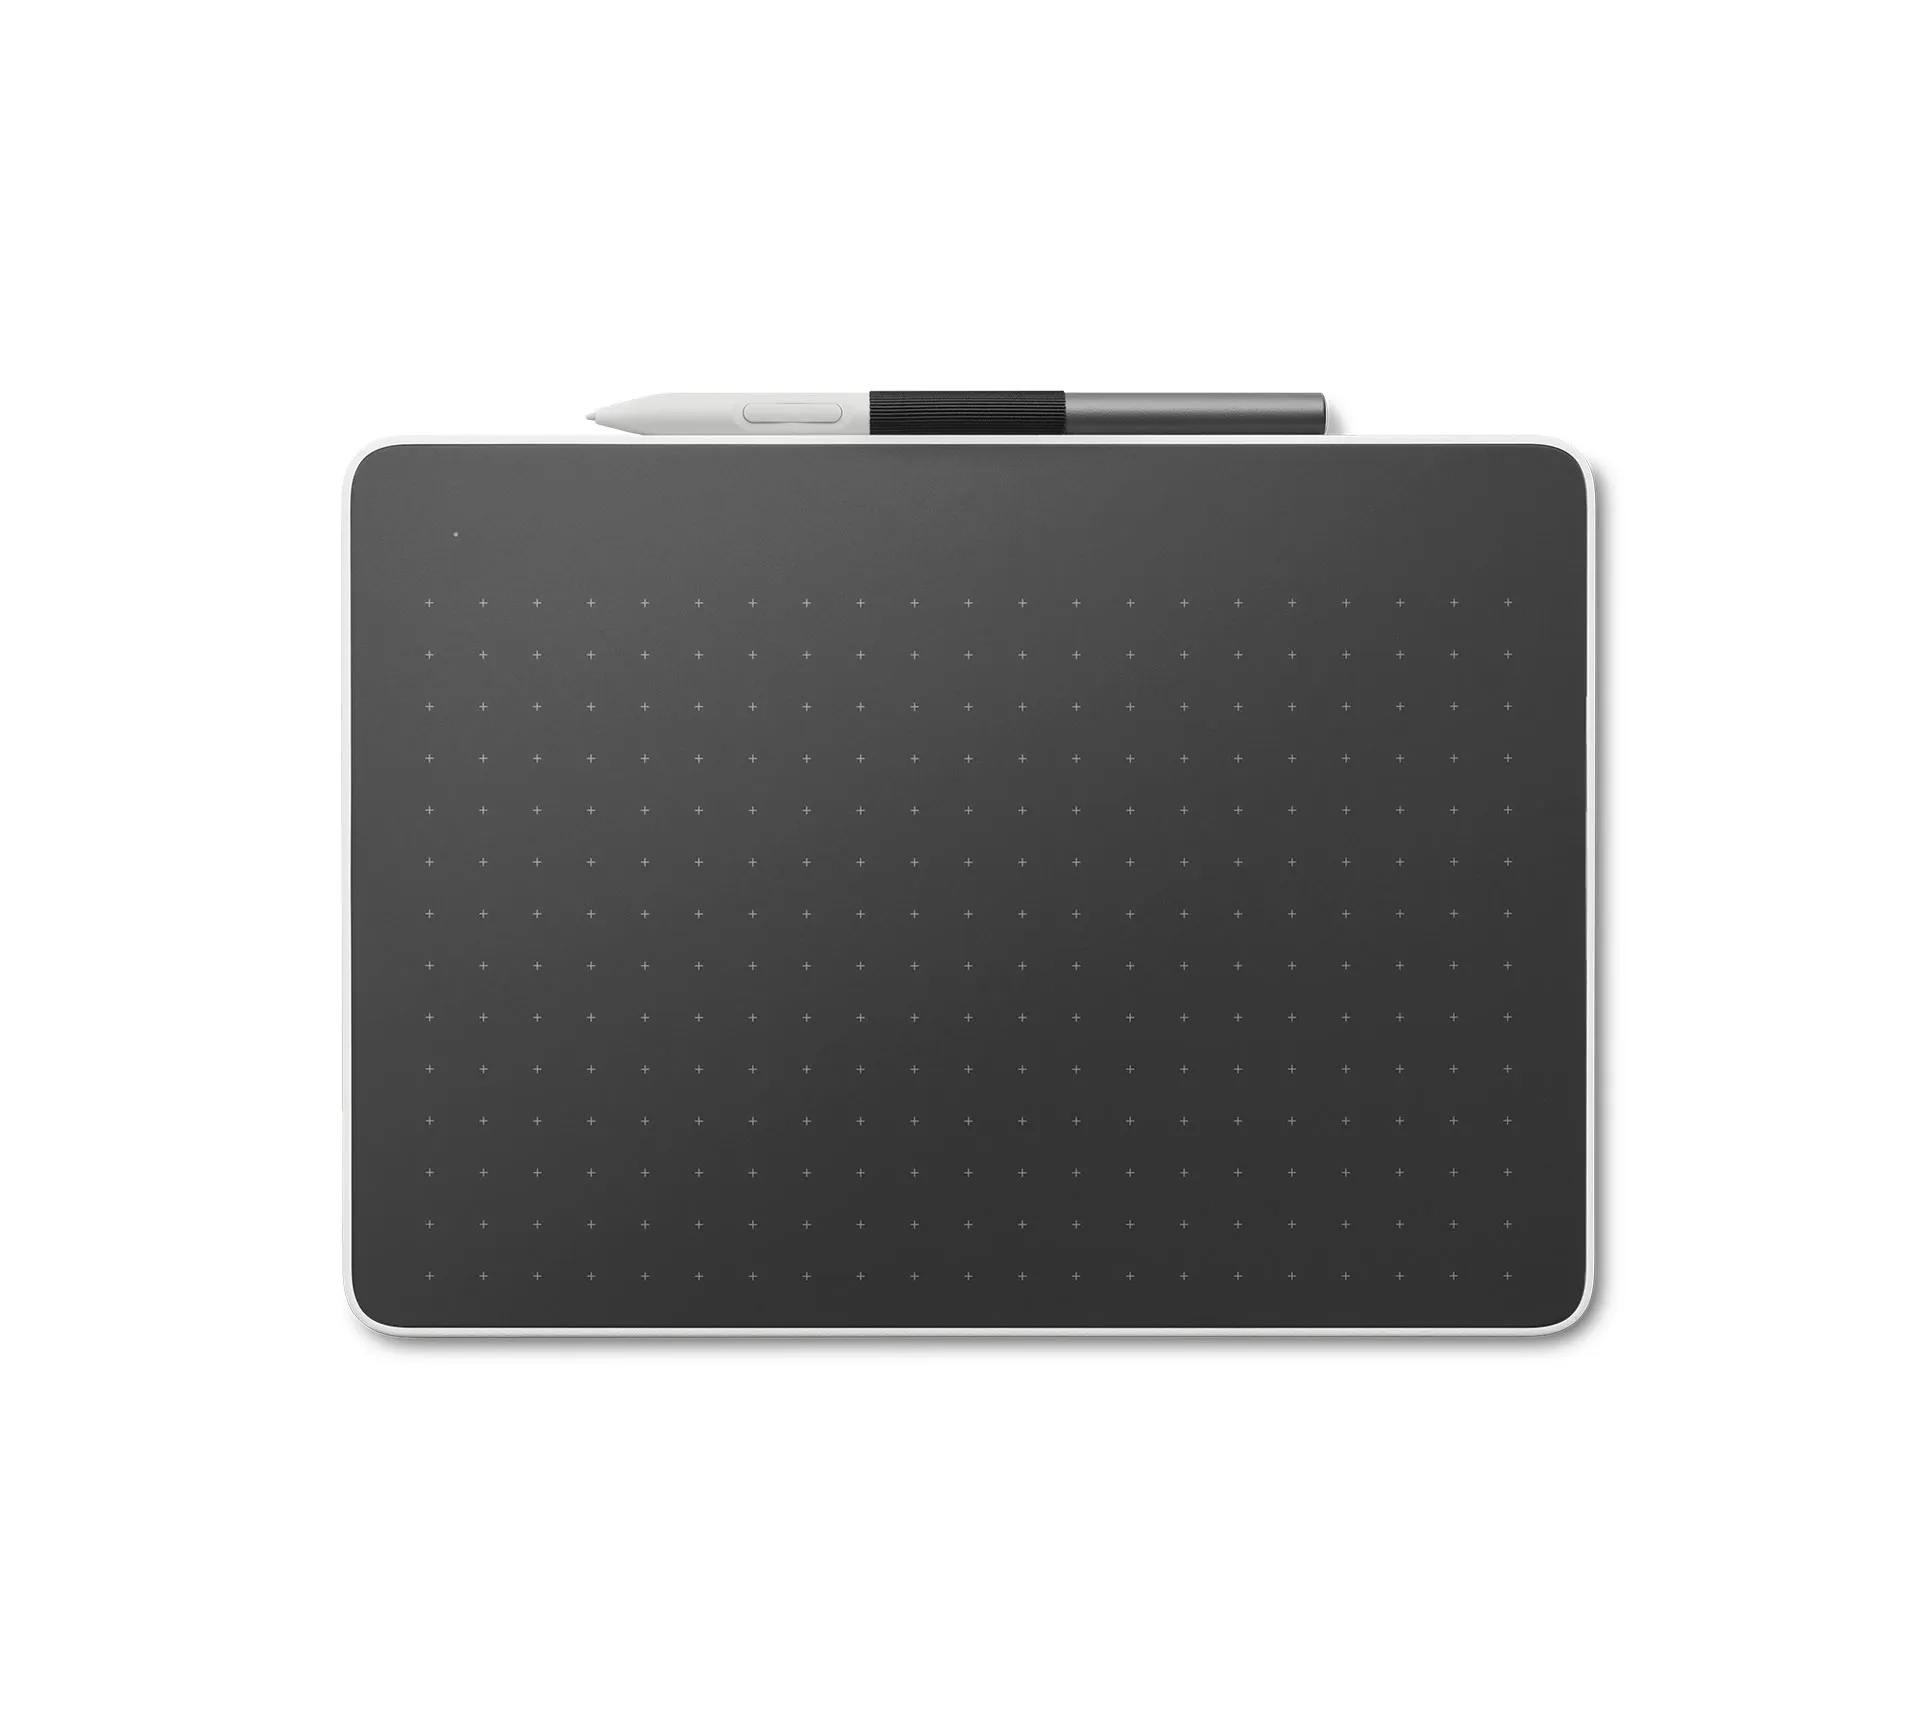 Wacom-One-Pen-Tablet-Front-View.png